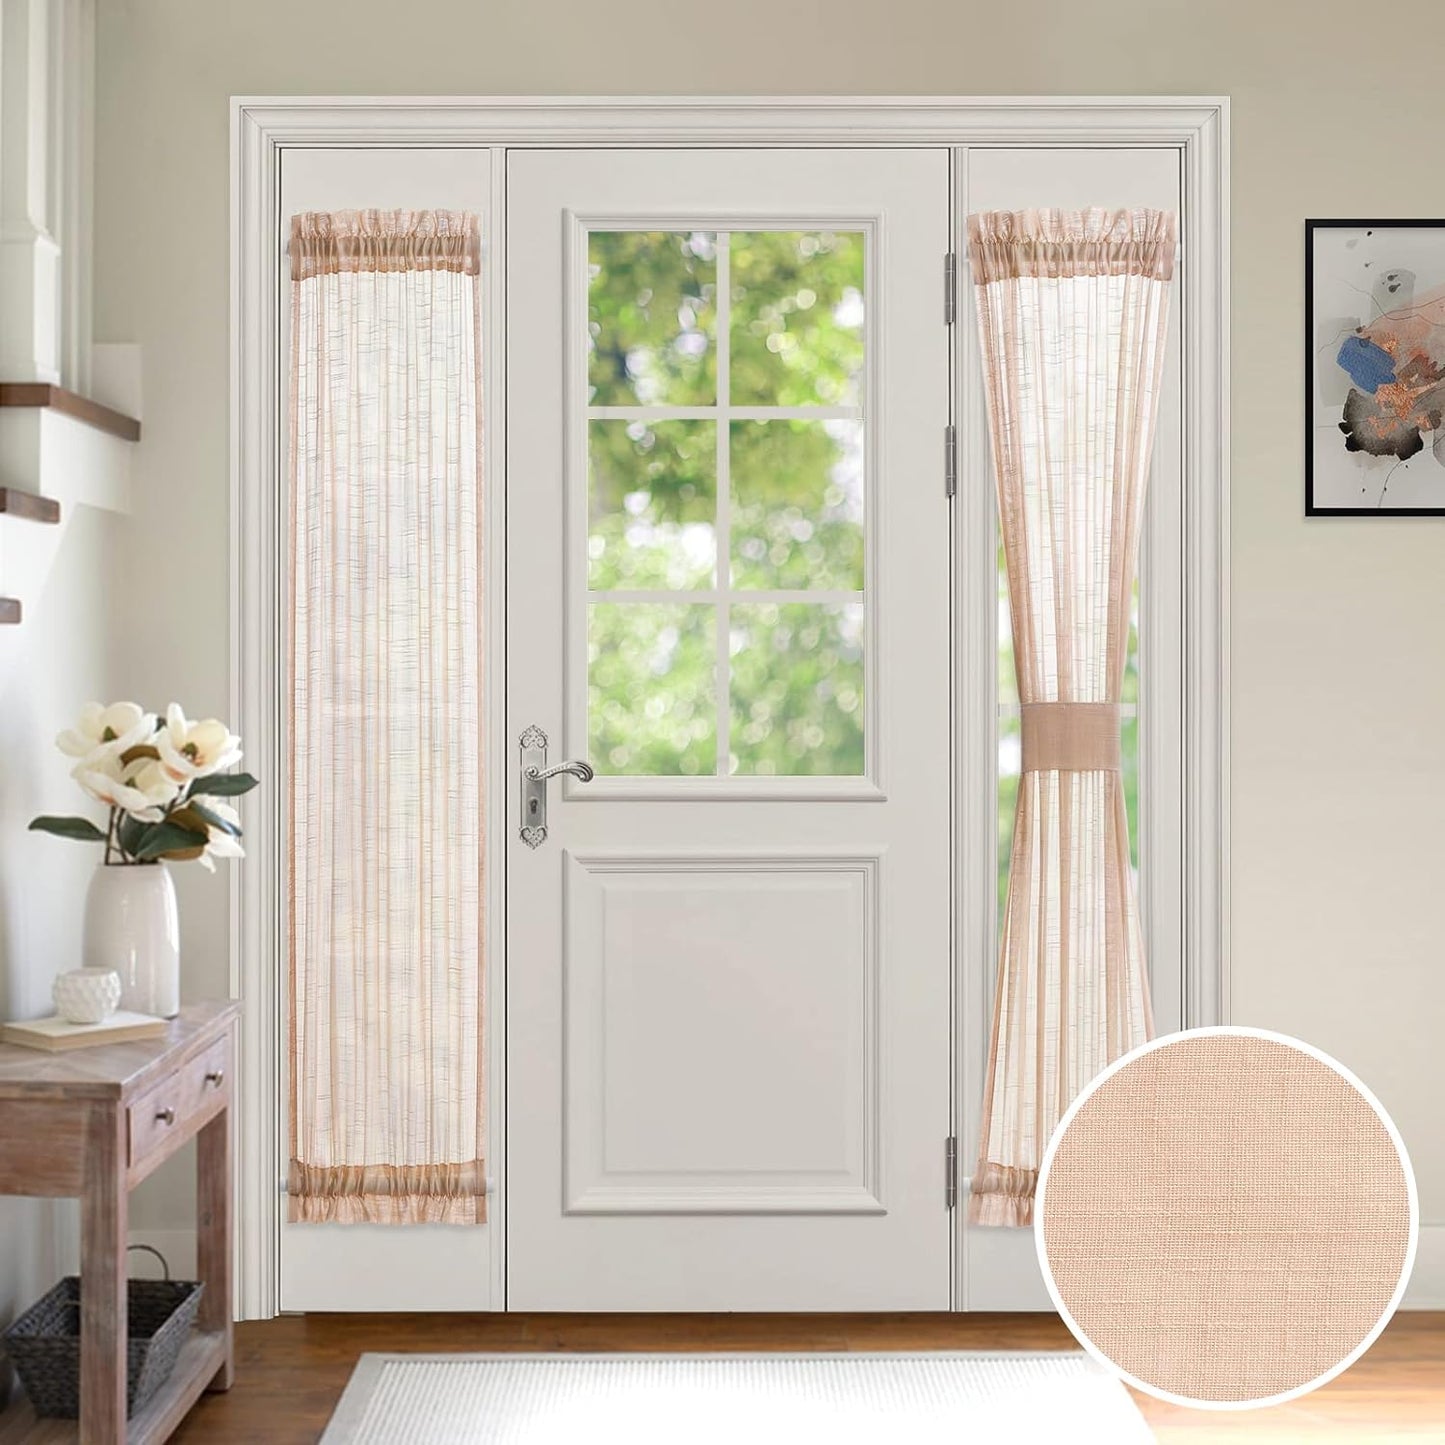 MIULEE 2 Panels French Door Sheer Curtains Teal Linen Textured Window Panels for Sidelight Door/Living Room/Kitchen Light Filtering W 25 X L 72 Inches  MIULEE Blush Pink 2 Panels-W25"Xl72" 